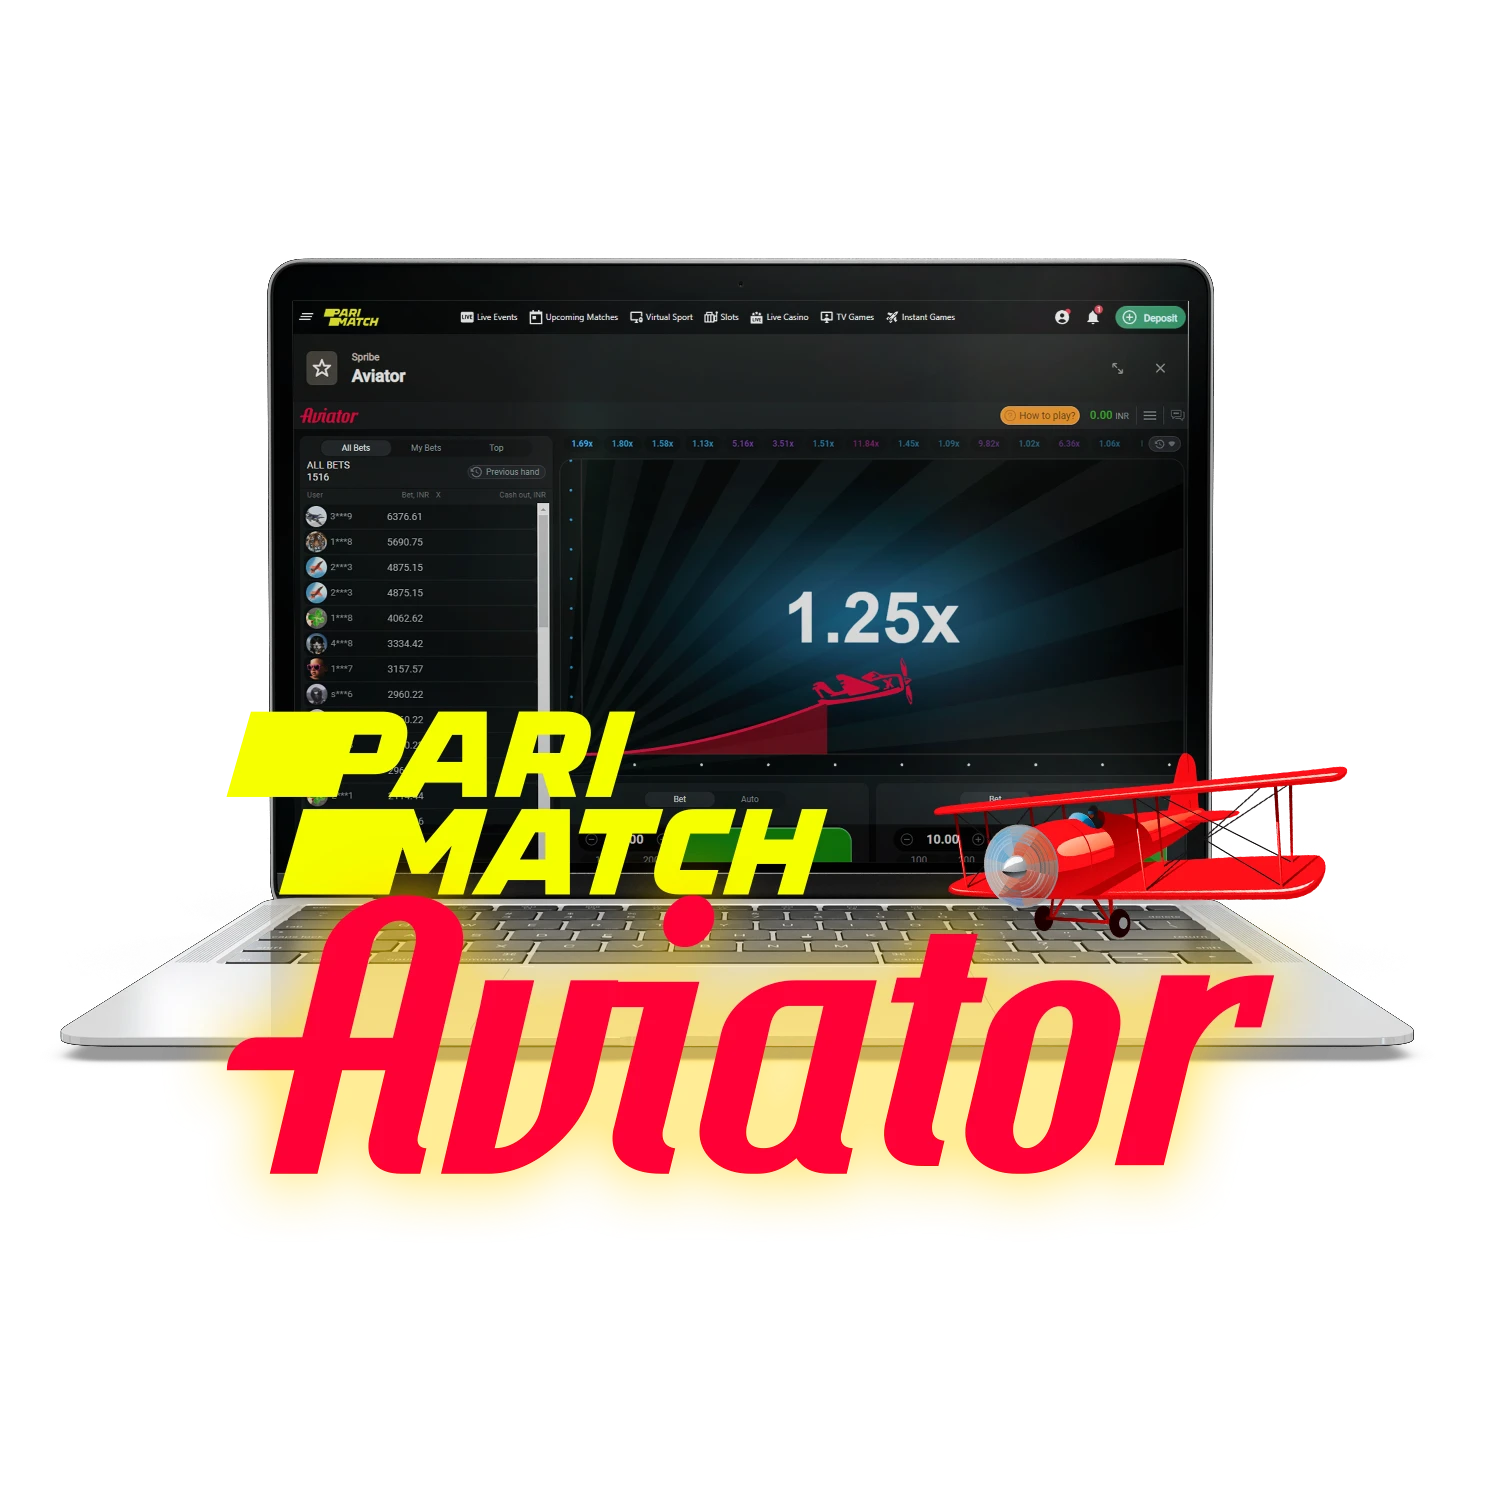 Learn how to play the Aviator game on the Parimatch website or in the app.